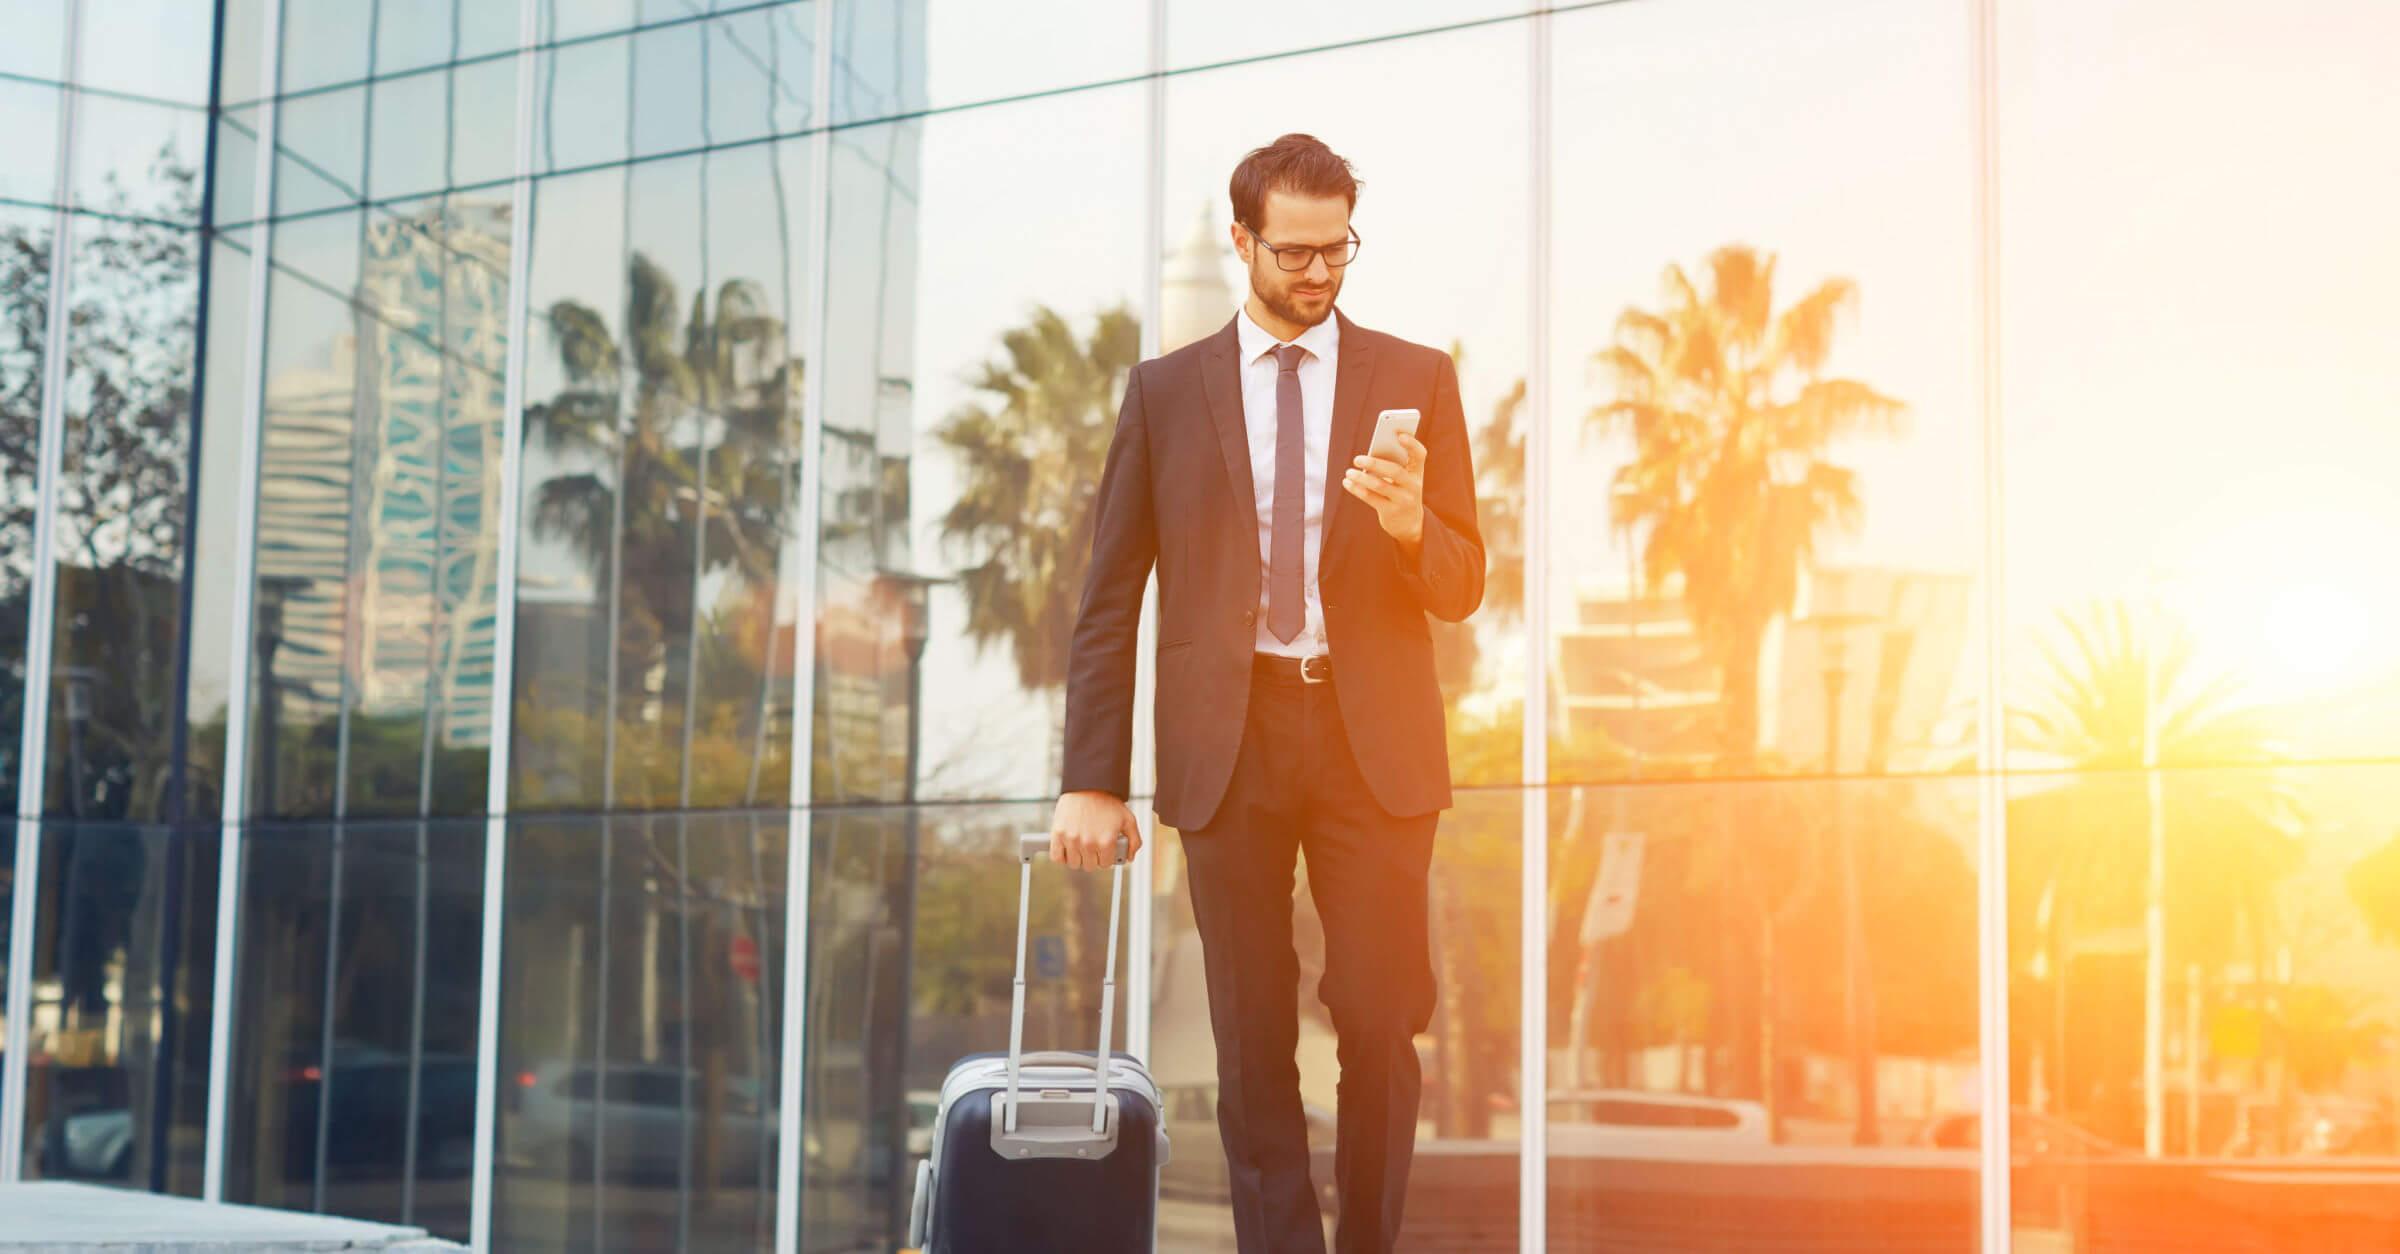 The 10 best apps for business travelers